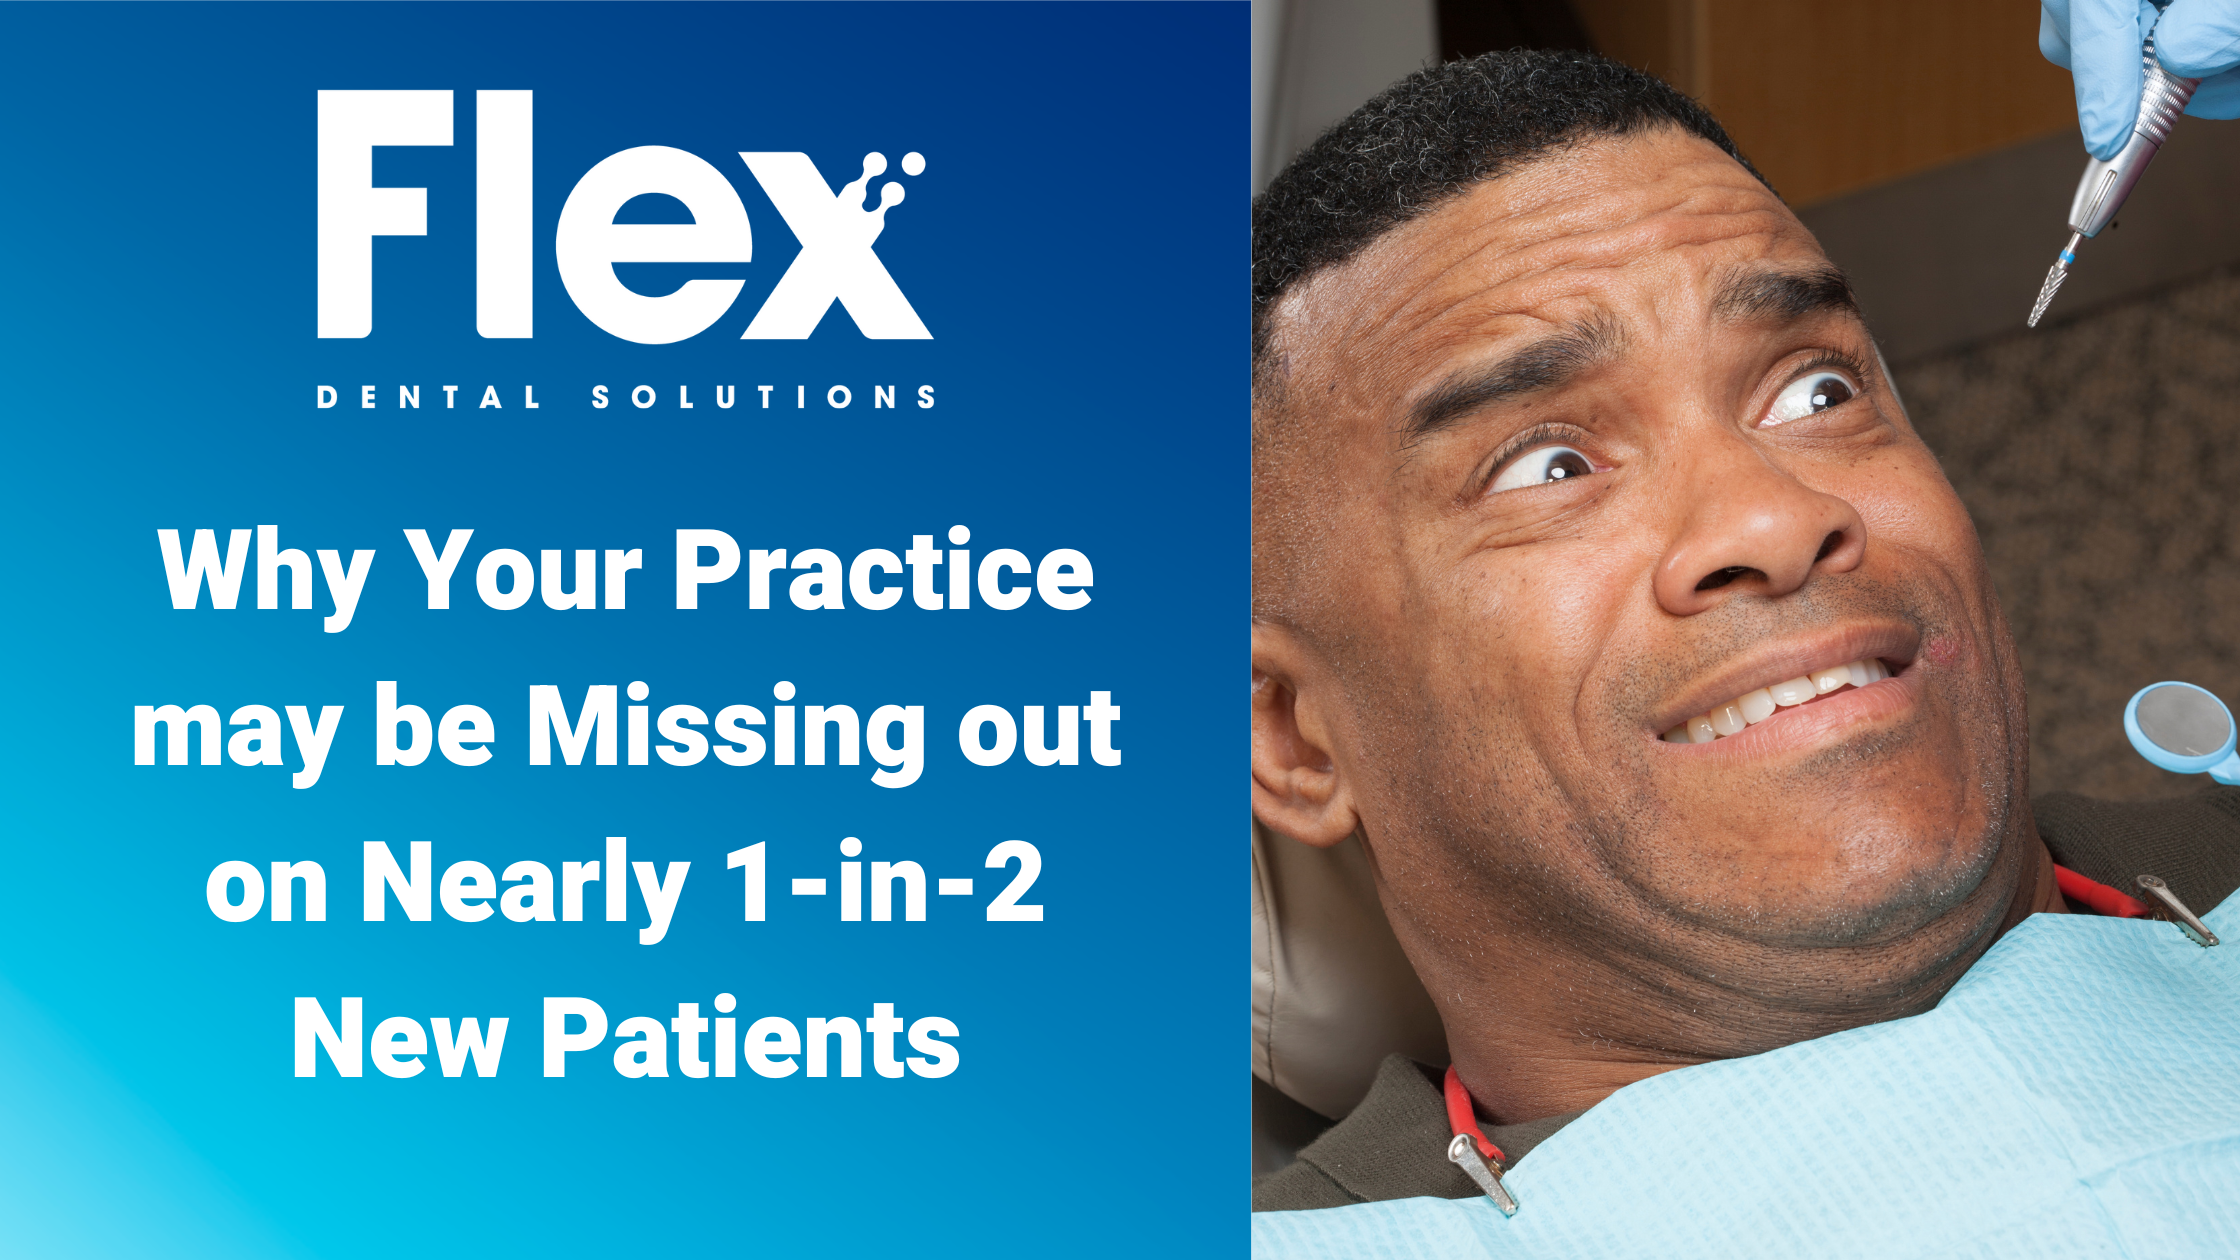 Why Your Practice may be Missing out on nearly 1-in-2 New Patients